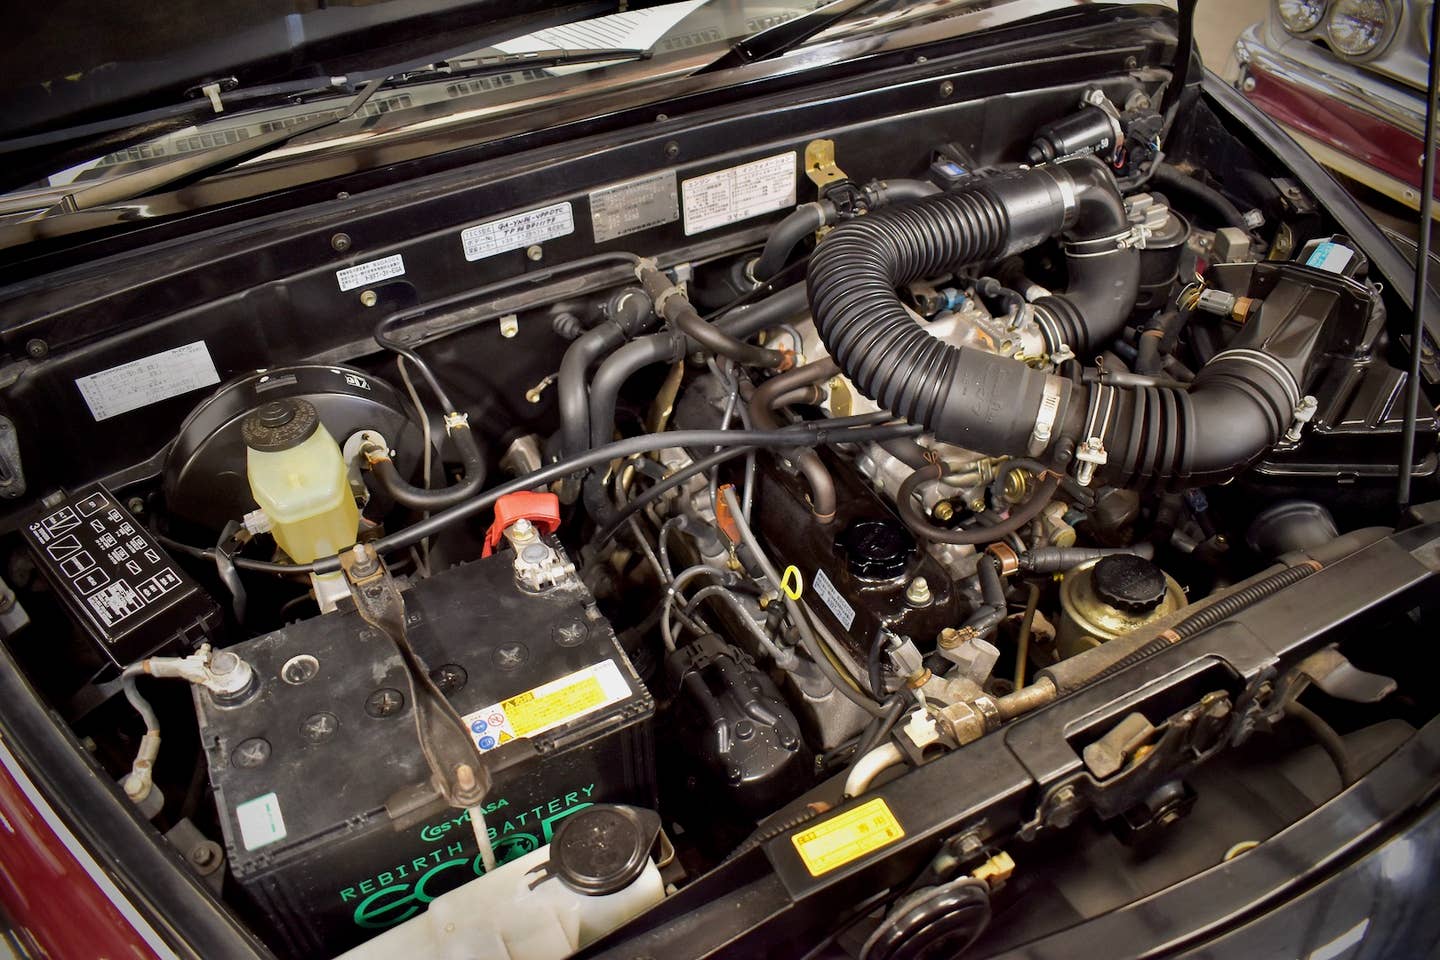 1996 Toyota Classic engine from a Hilux